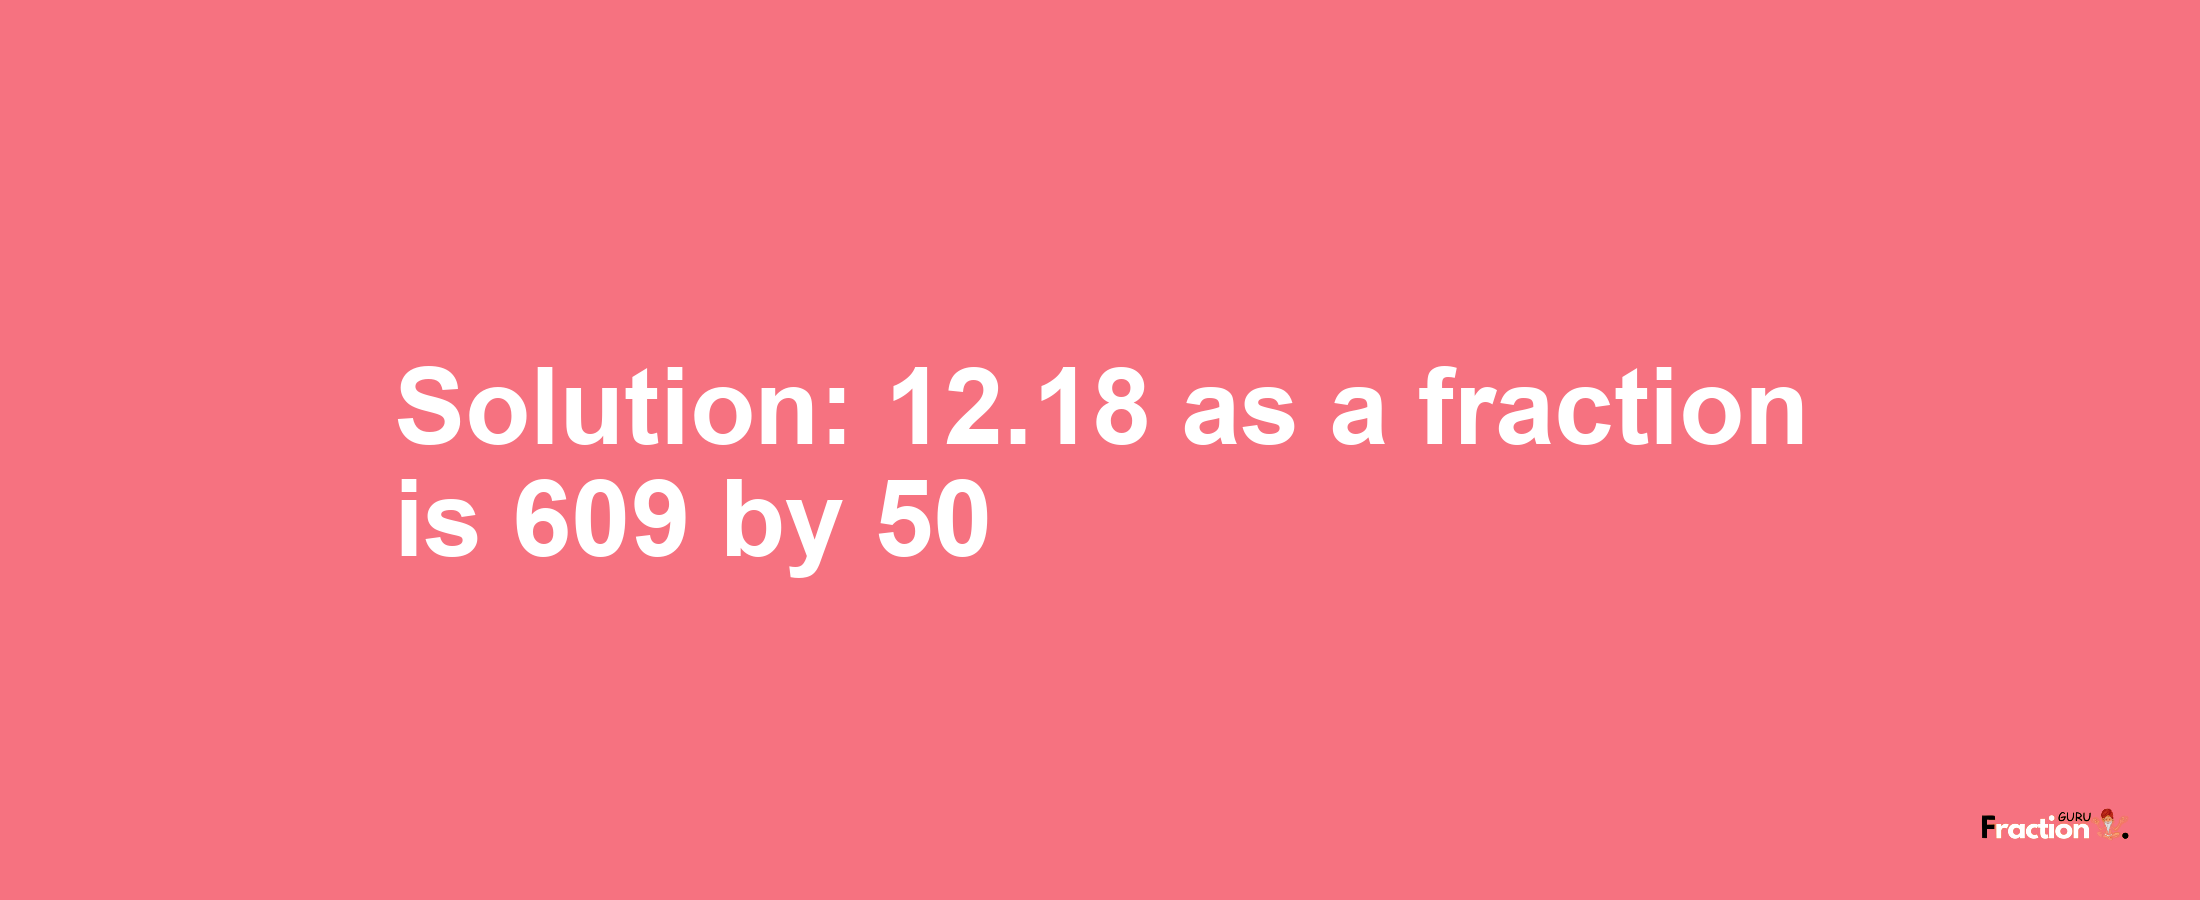 Solution:12.18 as a fraction is 609/50